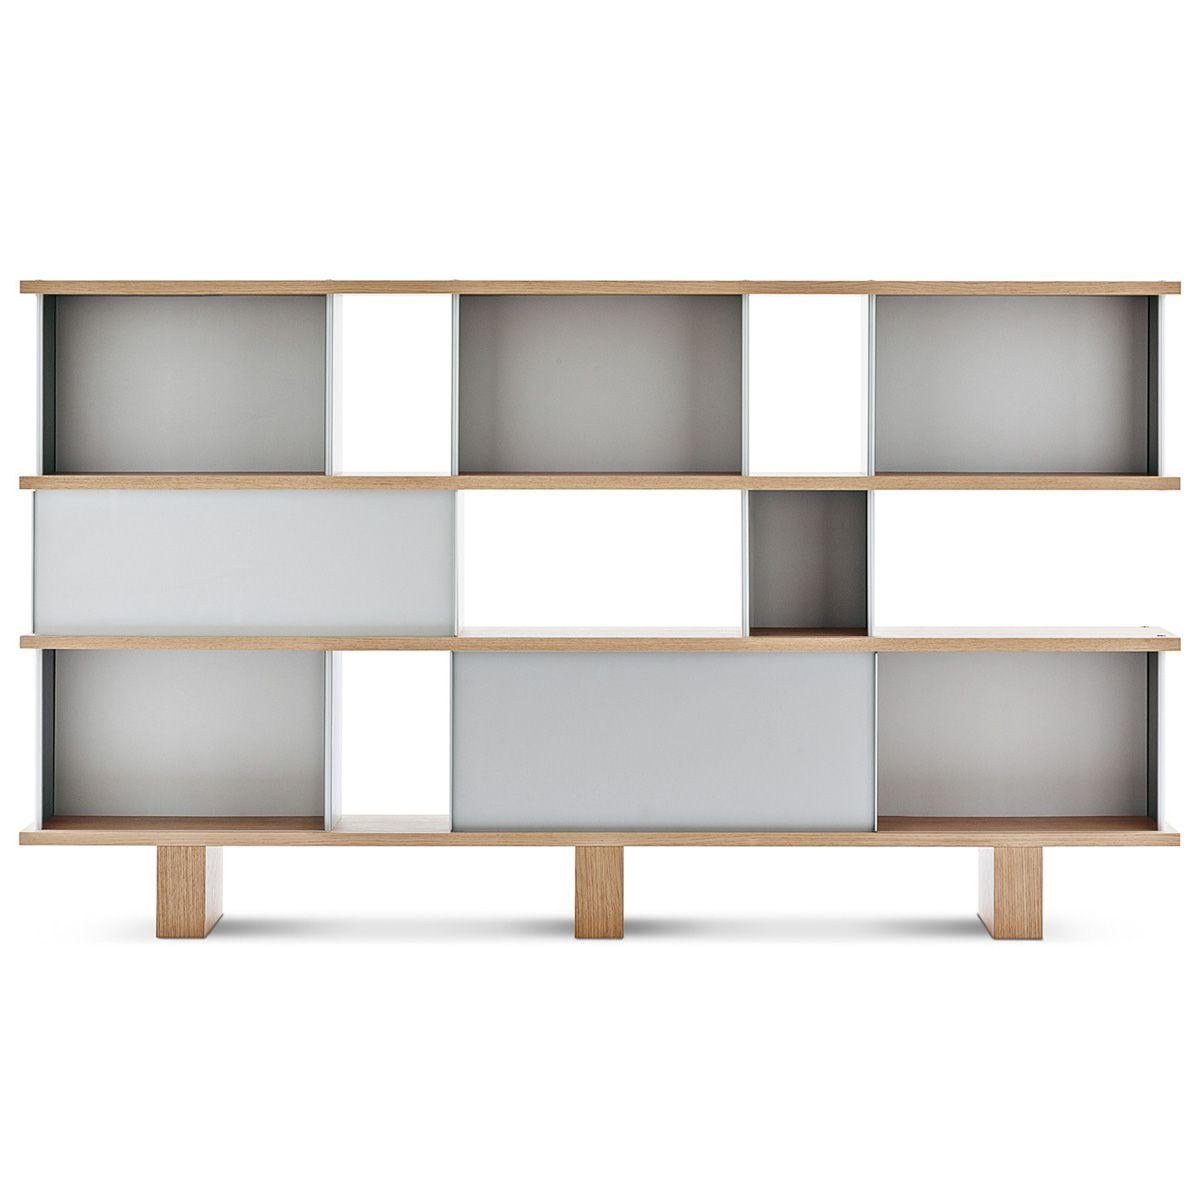 Contemporary Charlotte Perriand Nuage Shelving Unit, Wood and Aluminium by Cassina For Sale